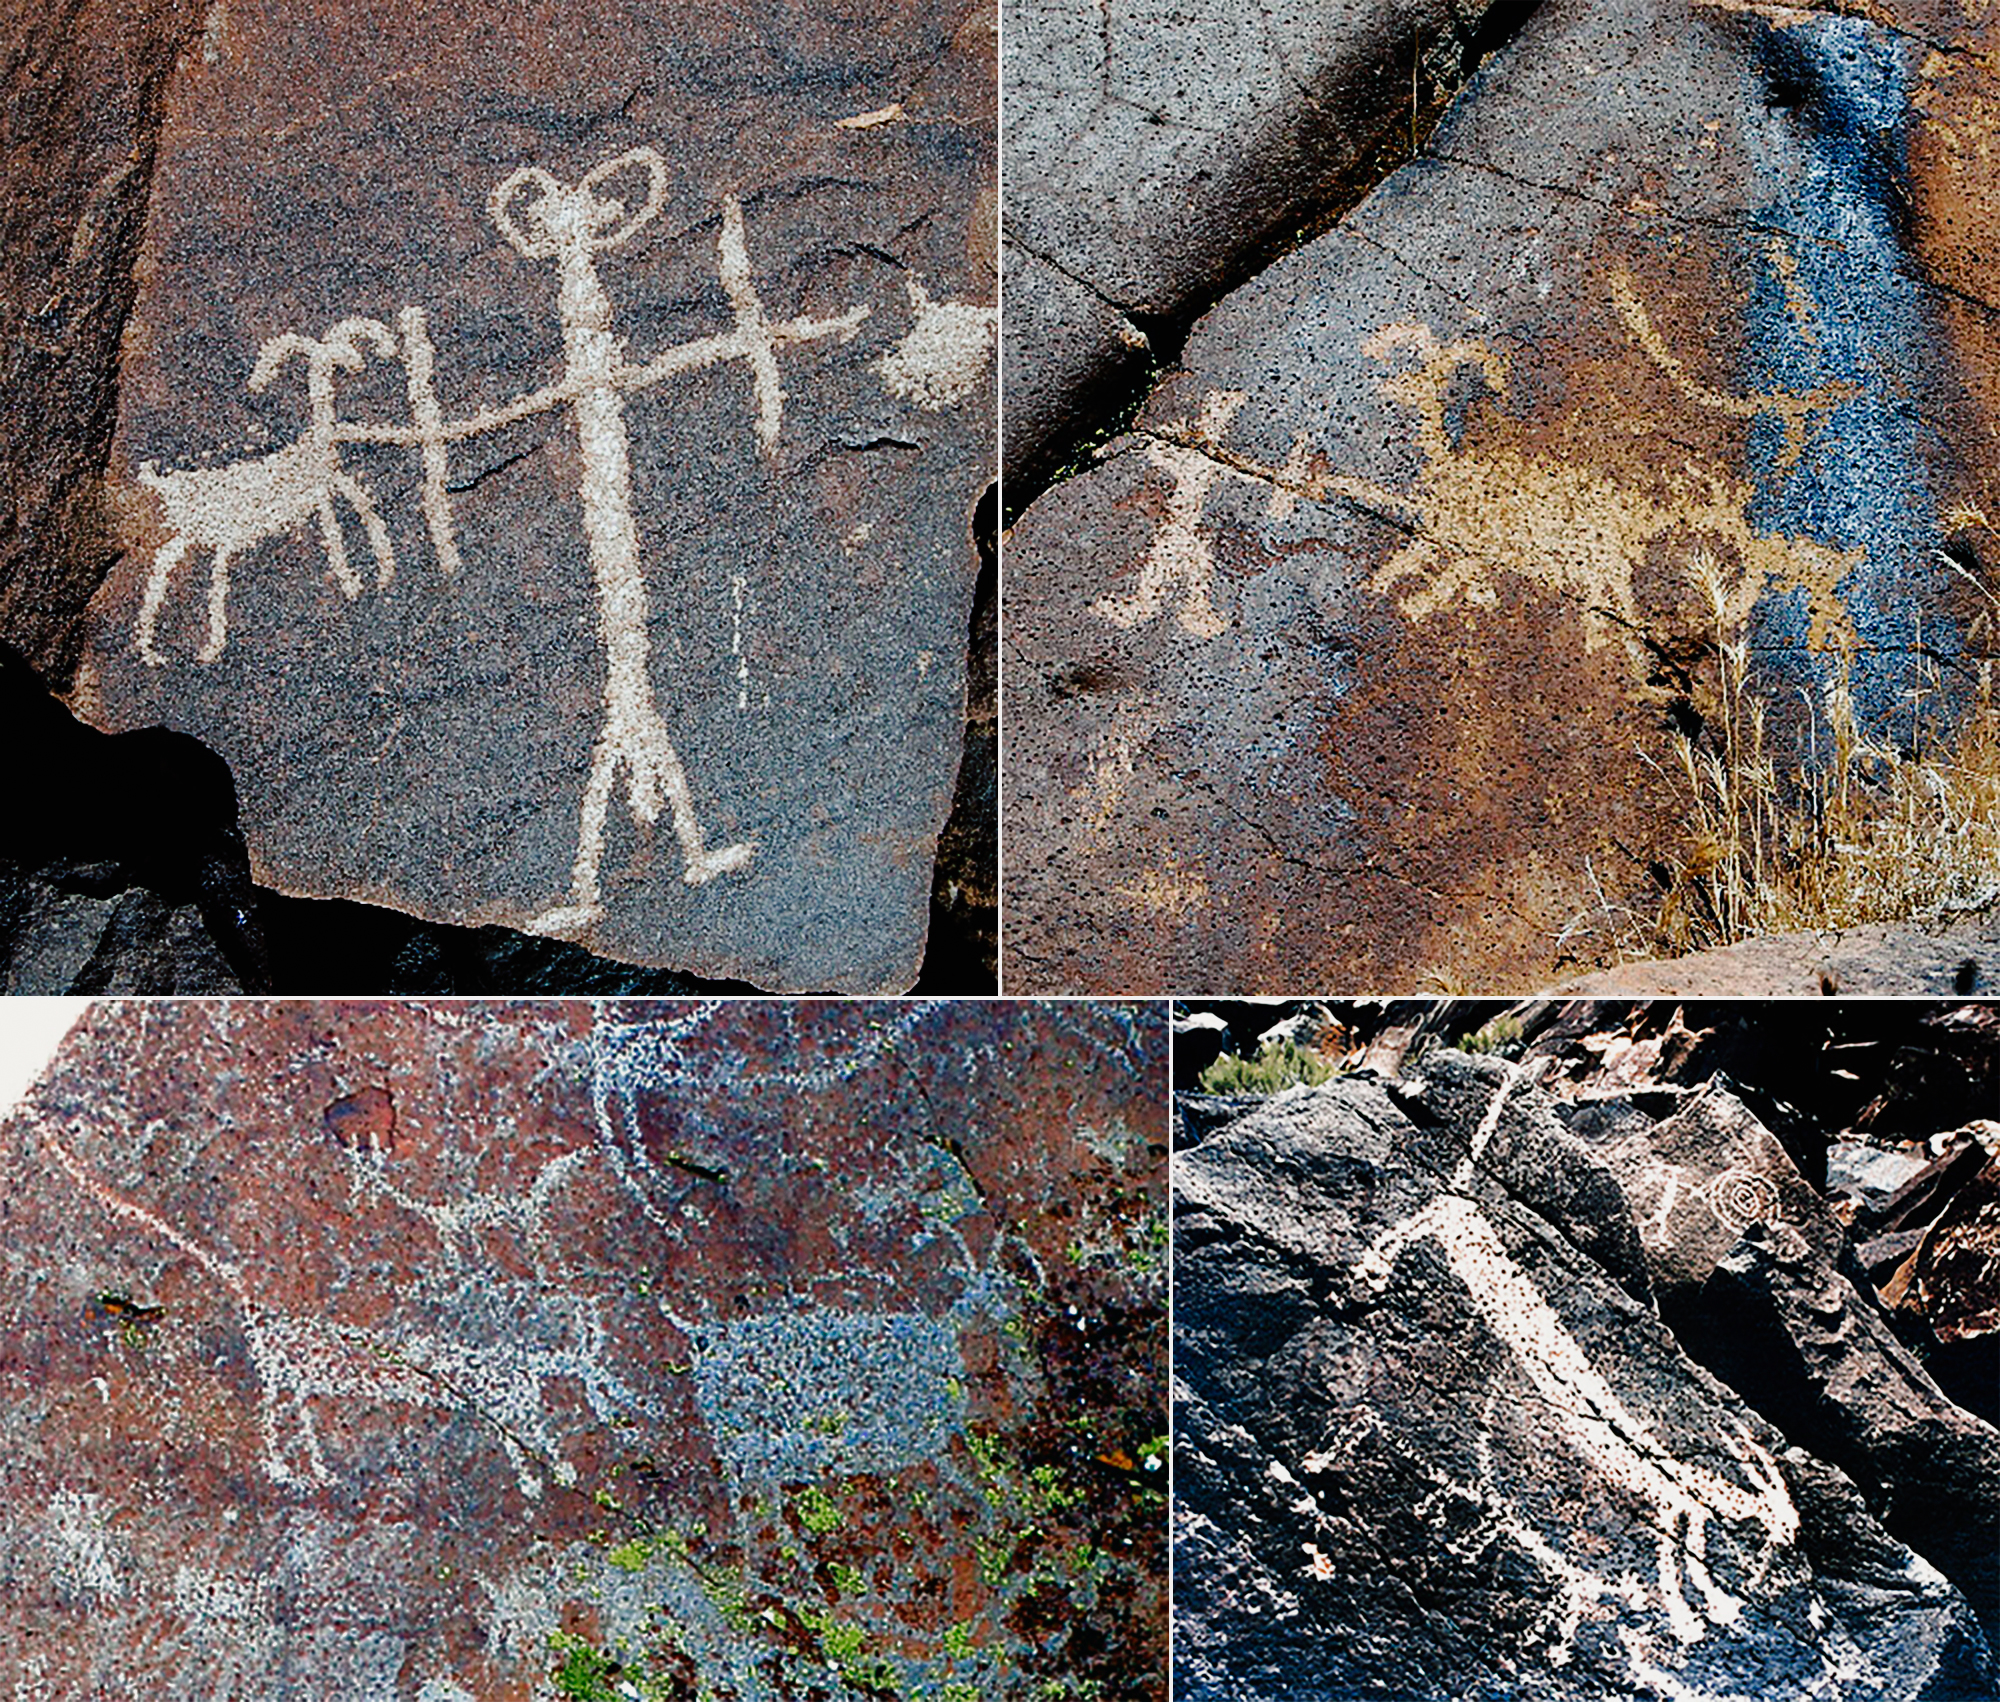 (Clockwise left) Bow & arrow armed hunters attacking sheep from Sheep Canyon. Bow & arrow armed hunters attacking sheep from Renegade Canyon. Coso Mountain Lions. Mountain lions attacking sheep  from Renegade Canyon.